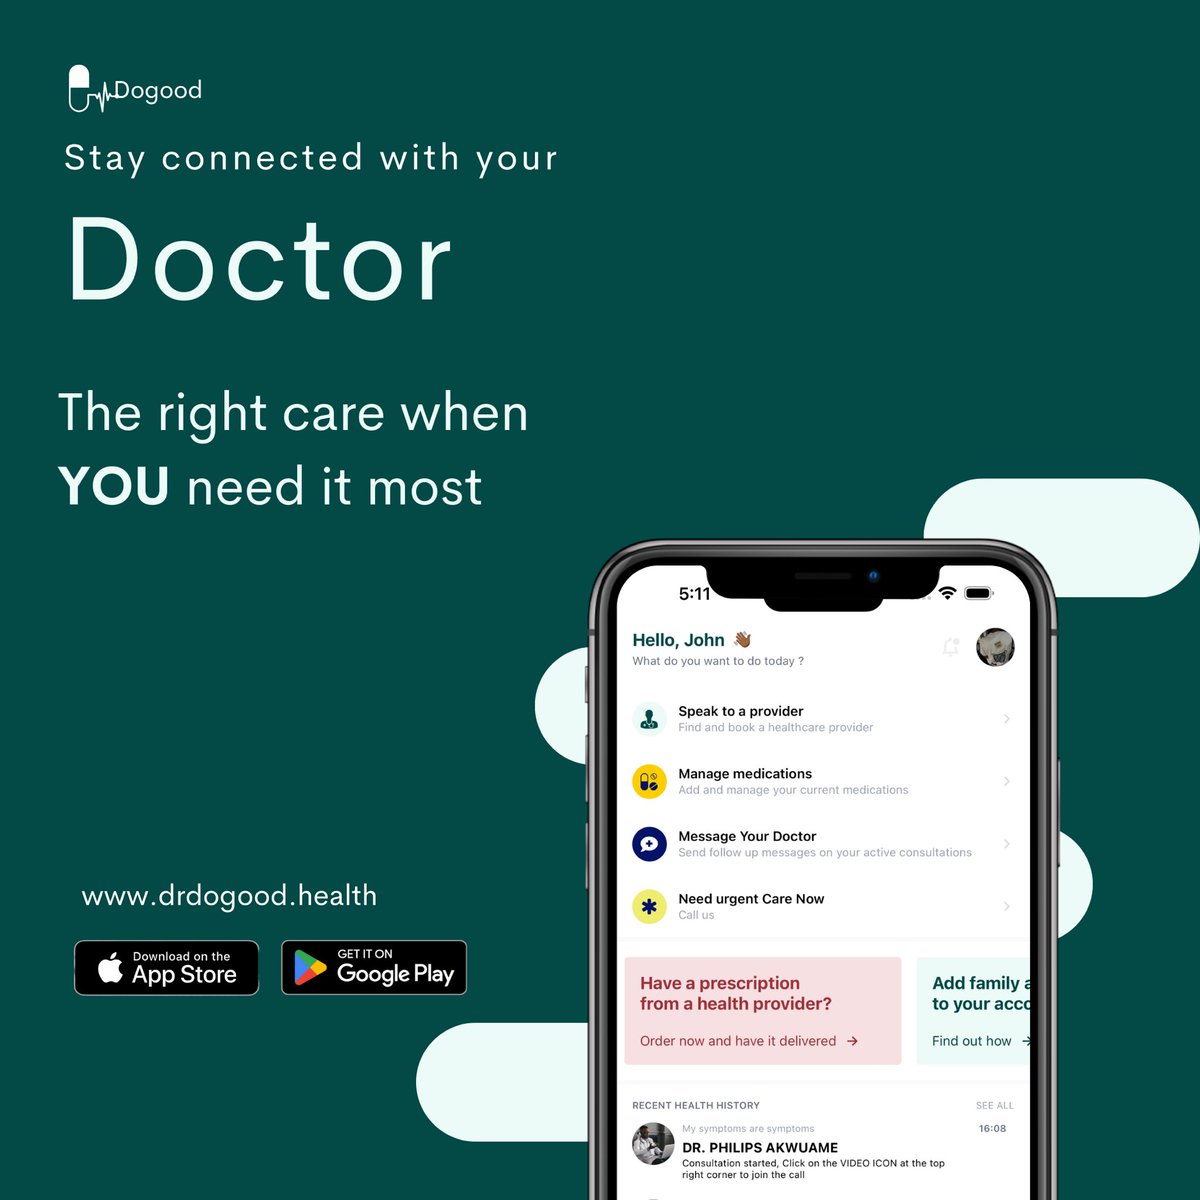 Access to care has never been easier, Stay connected with your healthcare providers anytime, anywhere!
#HealthcareAccess #VirtualCare #ConnectedWellness #drdogood  #WellnessJourney #HealthcareOnTheGo #HealthAtYourFingertips  #HealthcareAnywhere  #StayConnectedStayHealthy